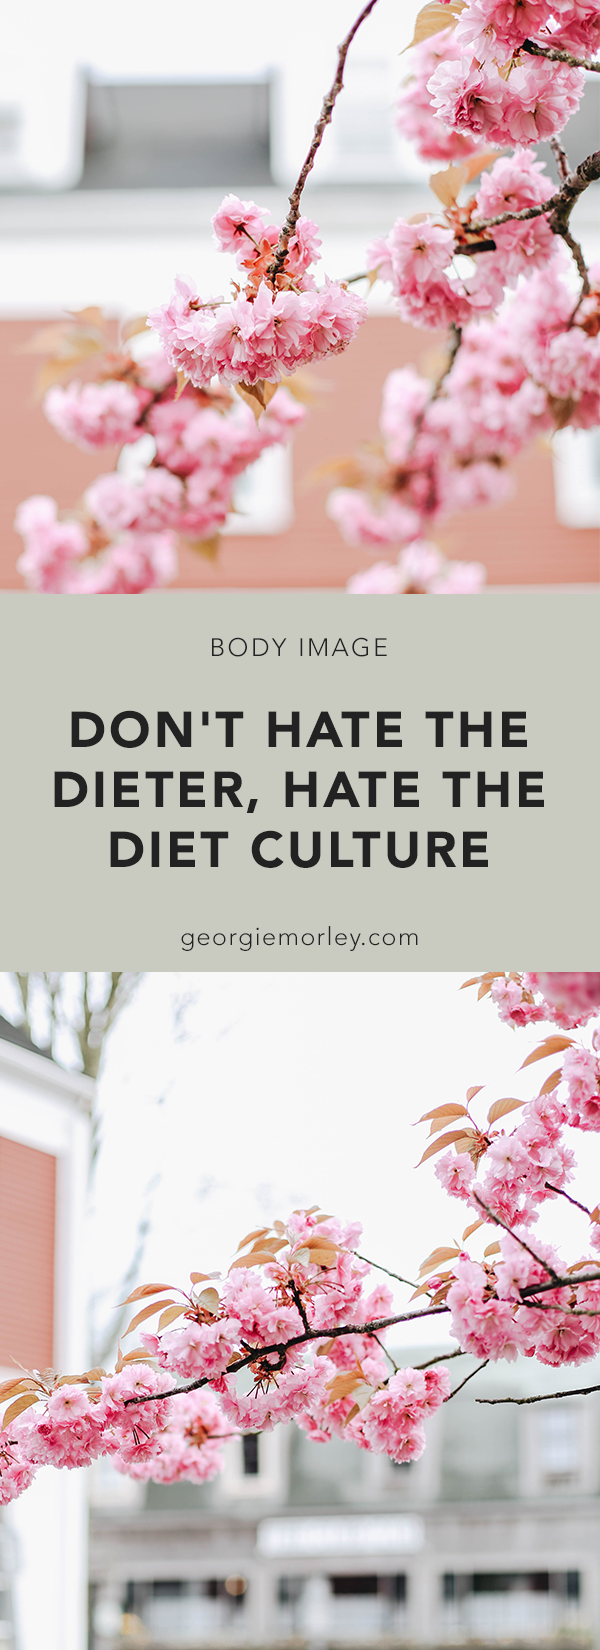 Don't Hate the Dieter, Hate the Diet Culture